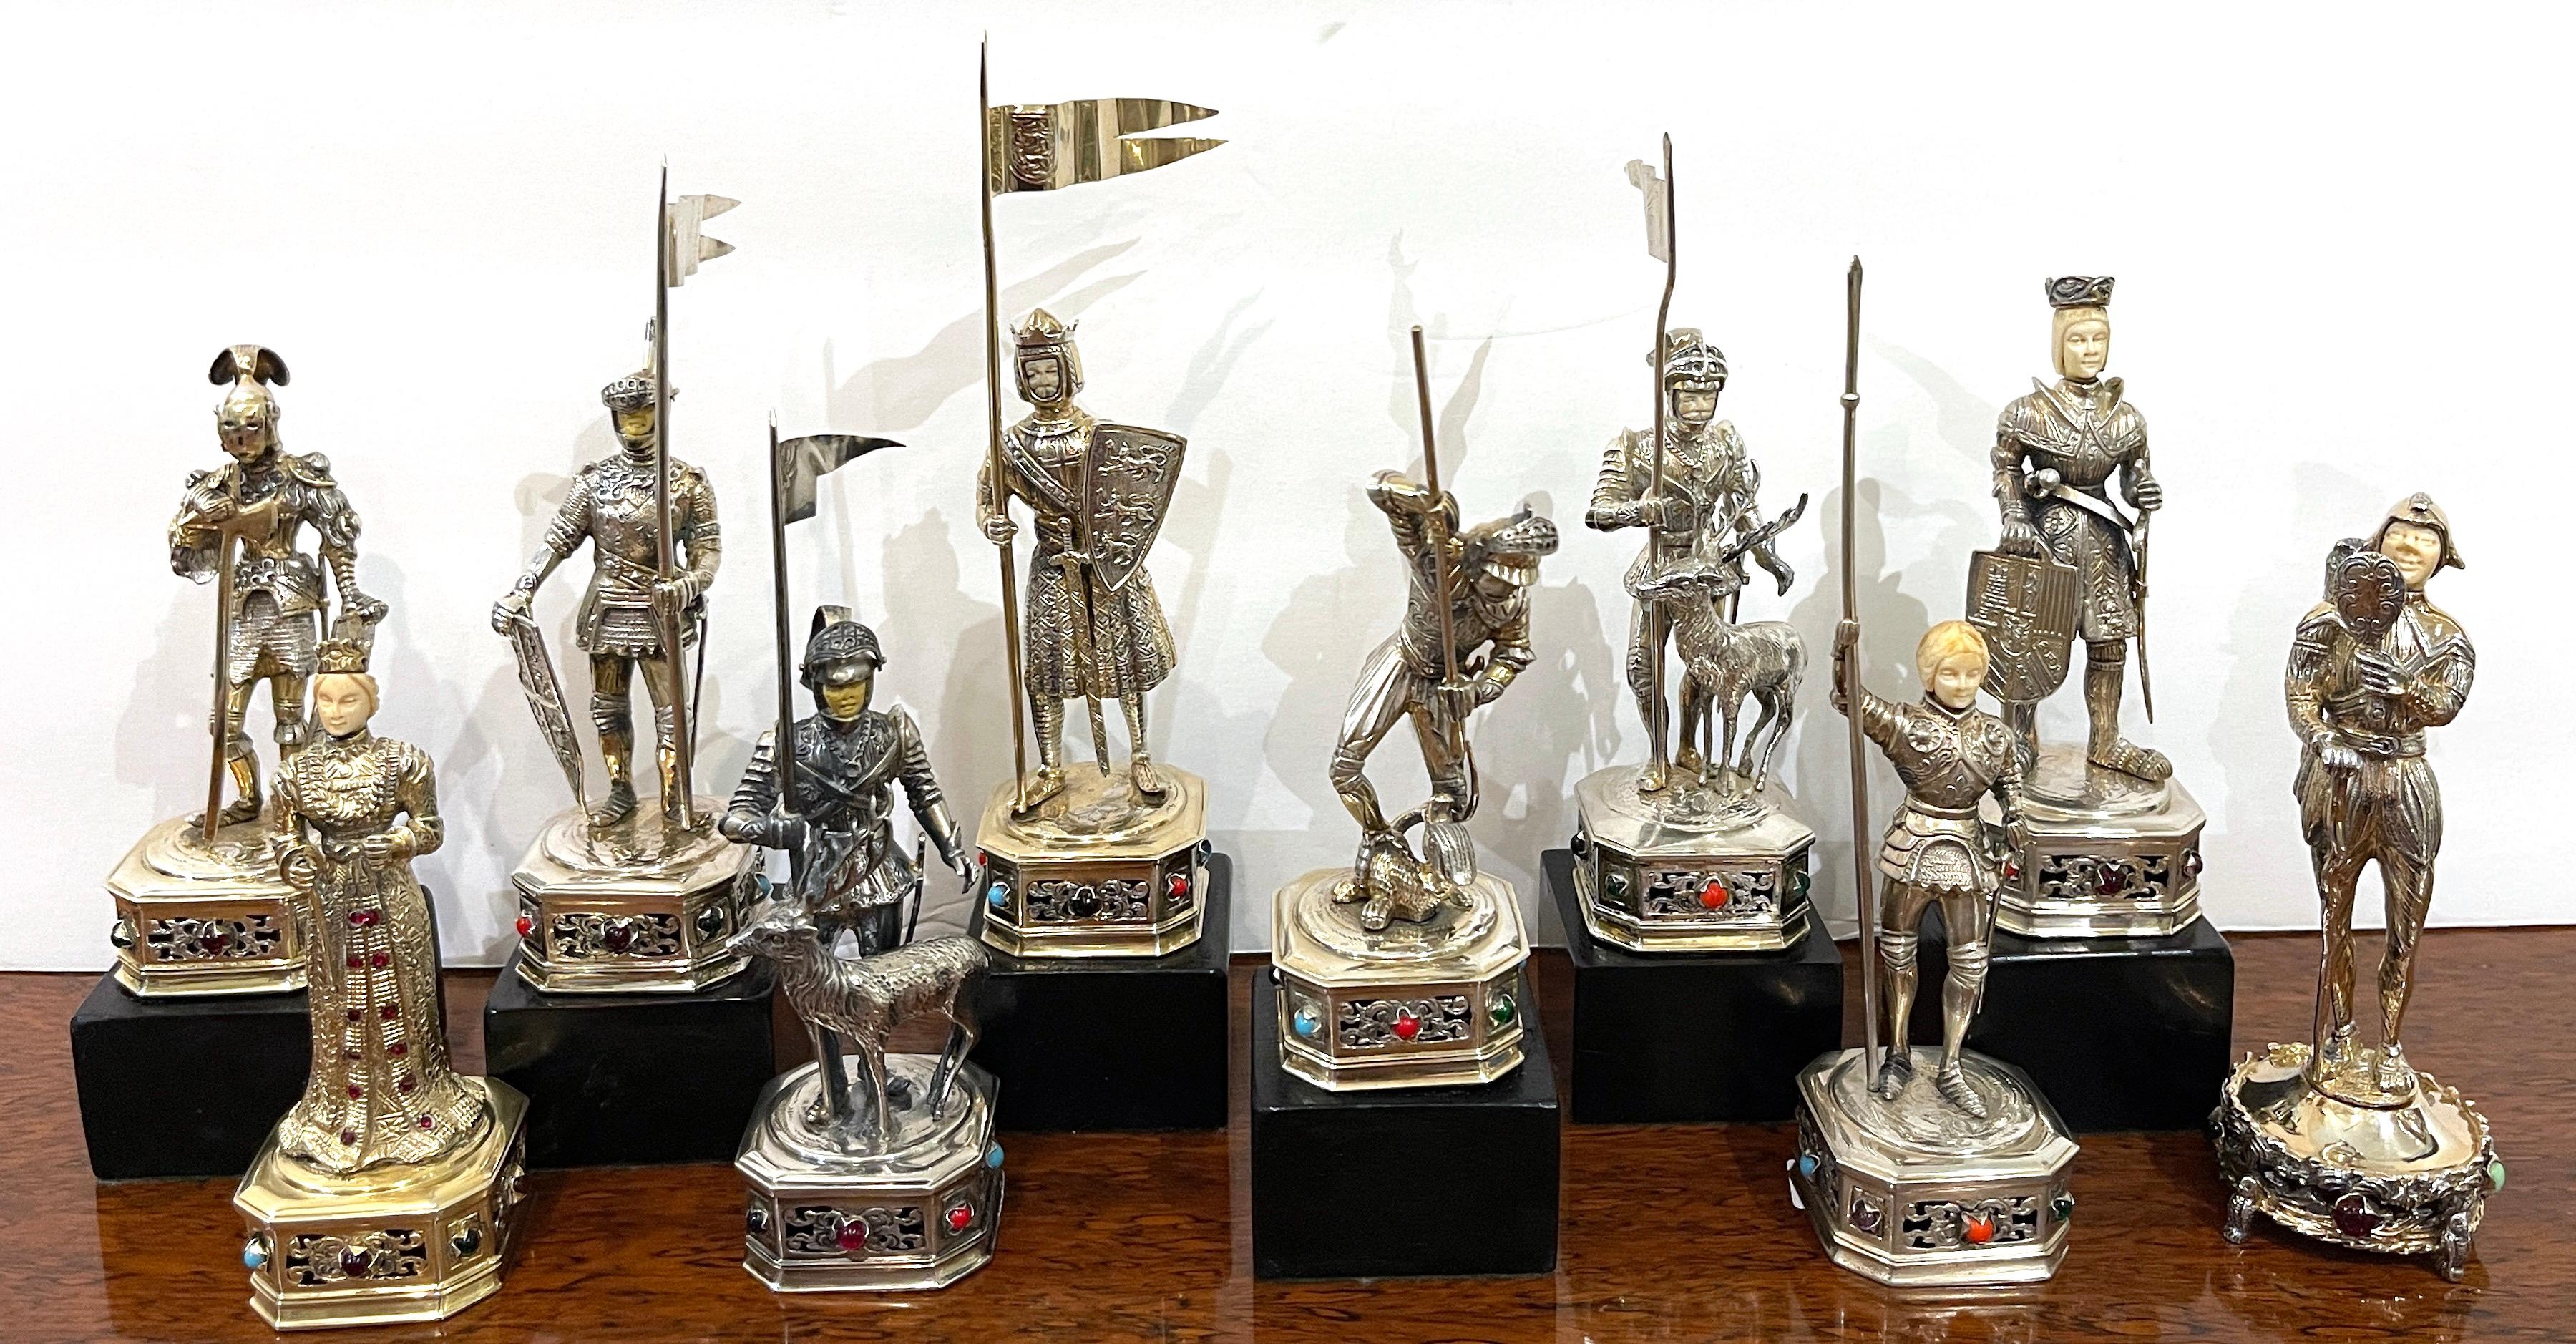 Renaissance Collection of Ten Sterling Silver & Semi-Precious Stone Medieval Figures